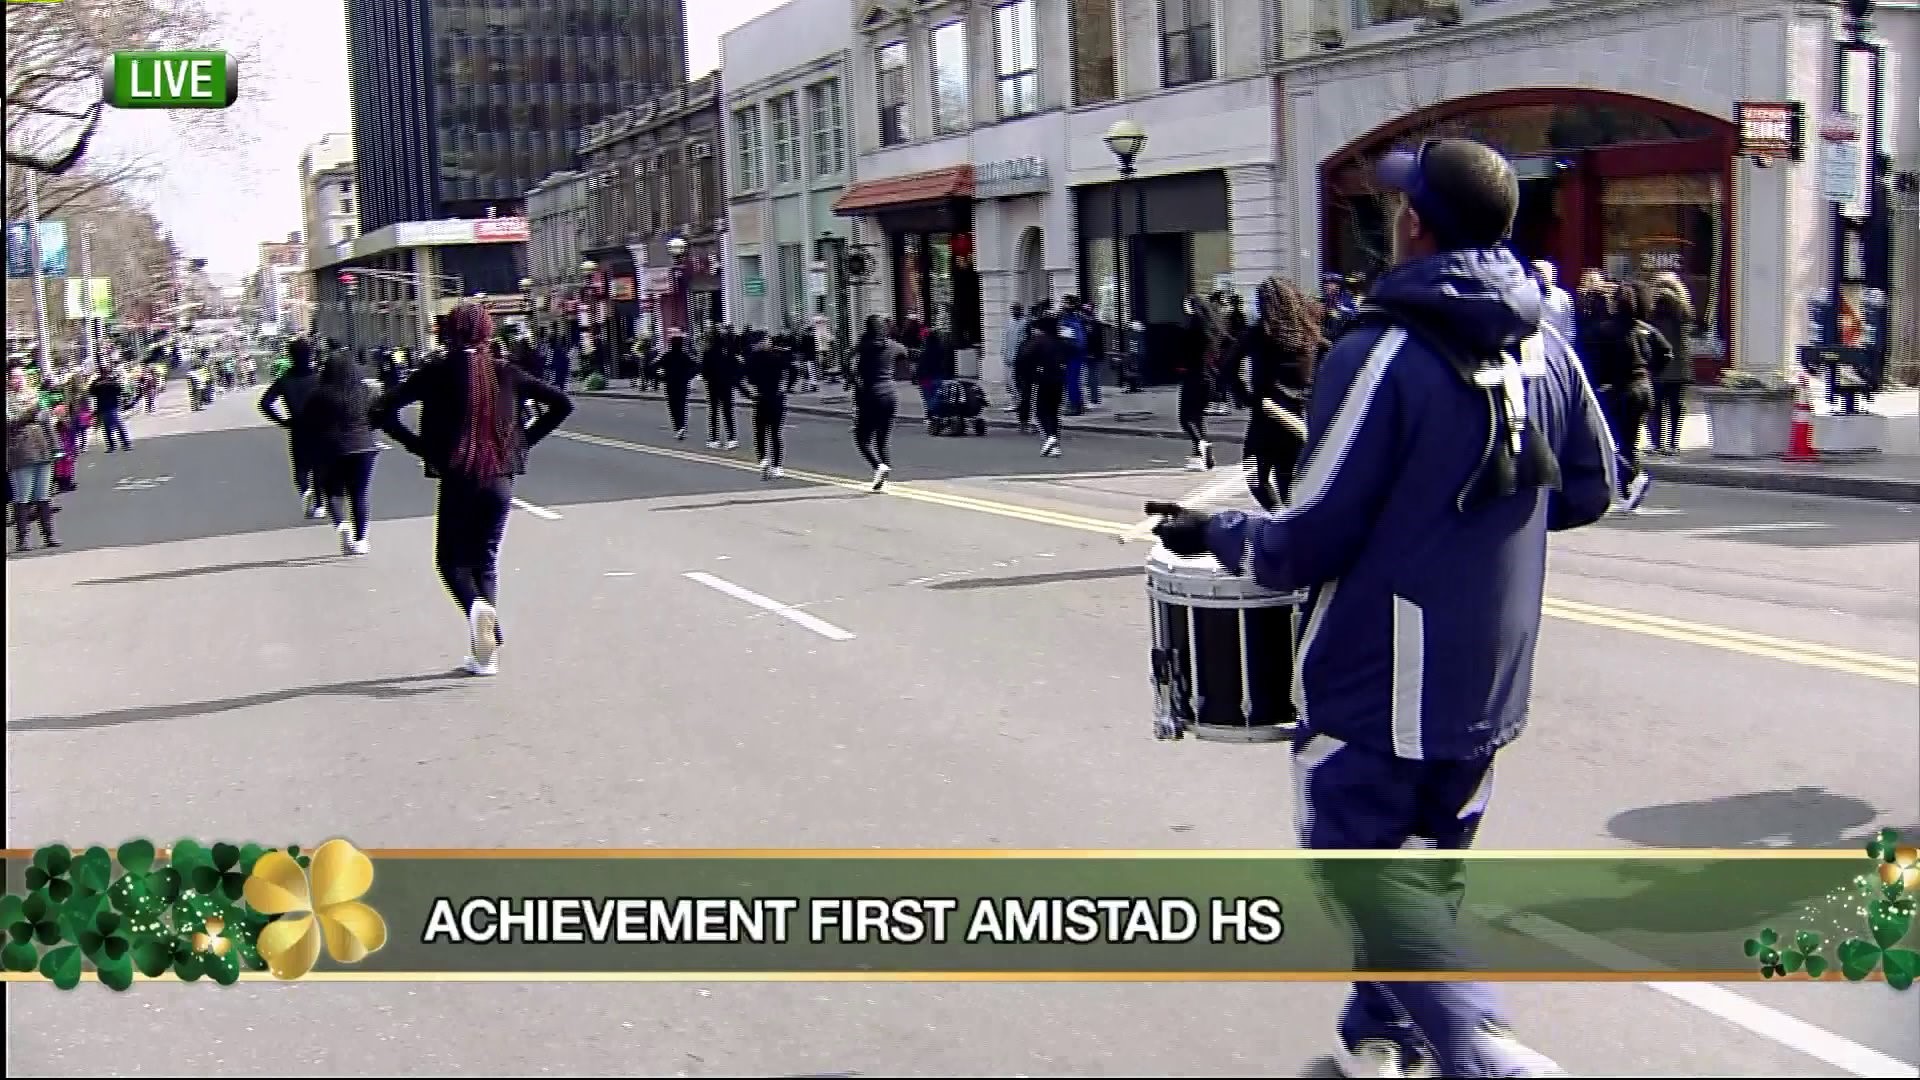 Achievement First Amistad marching band